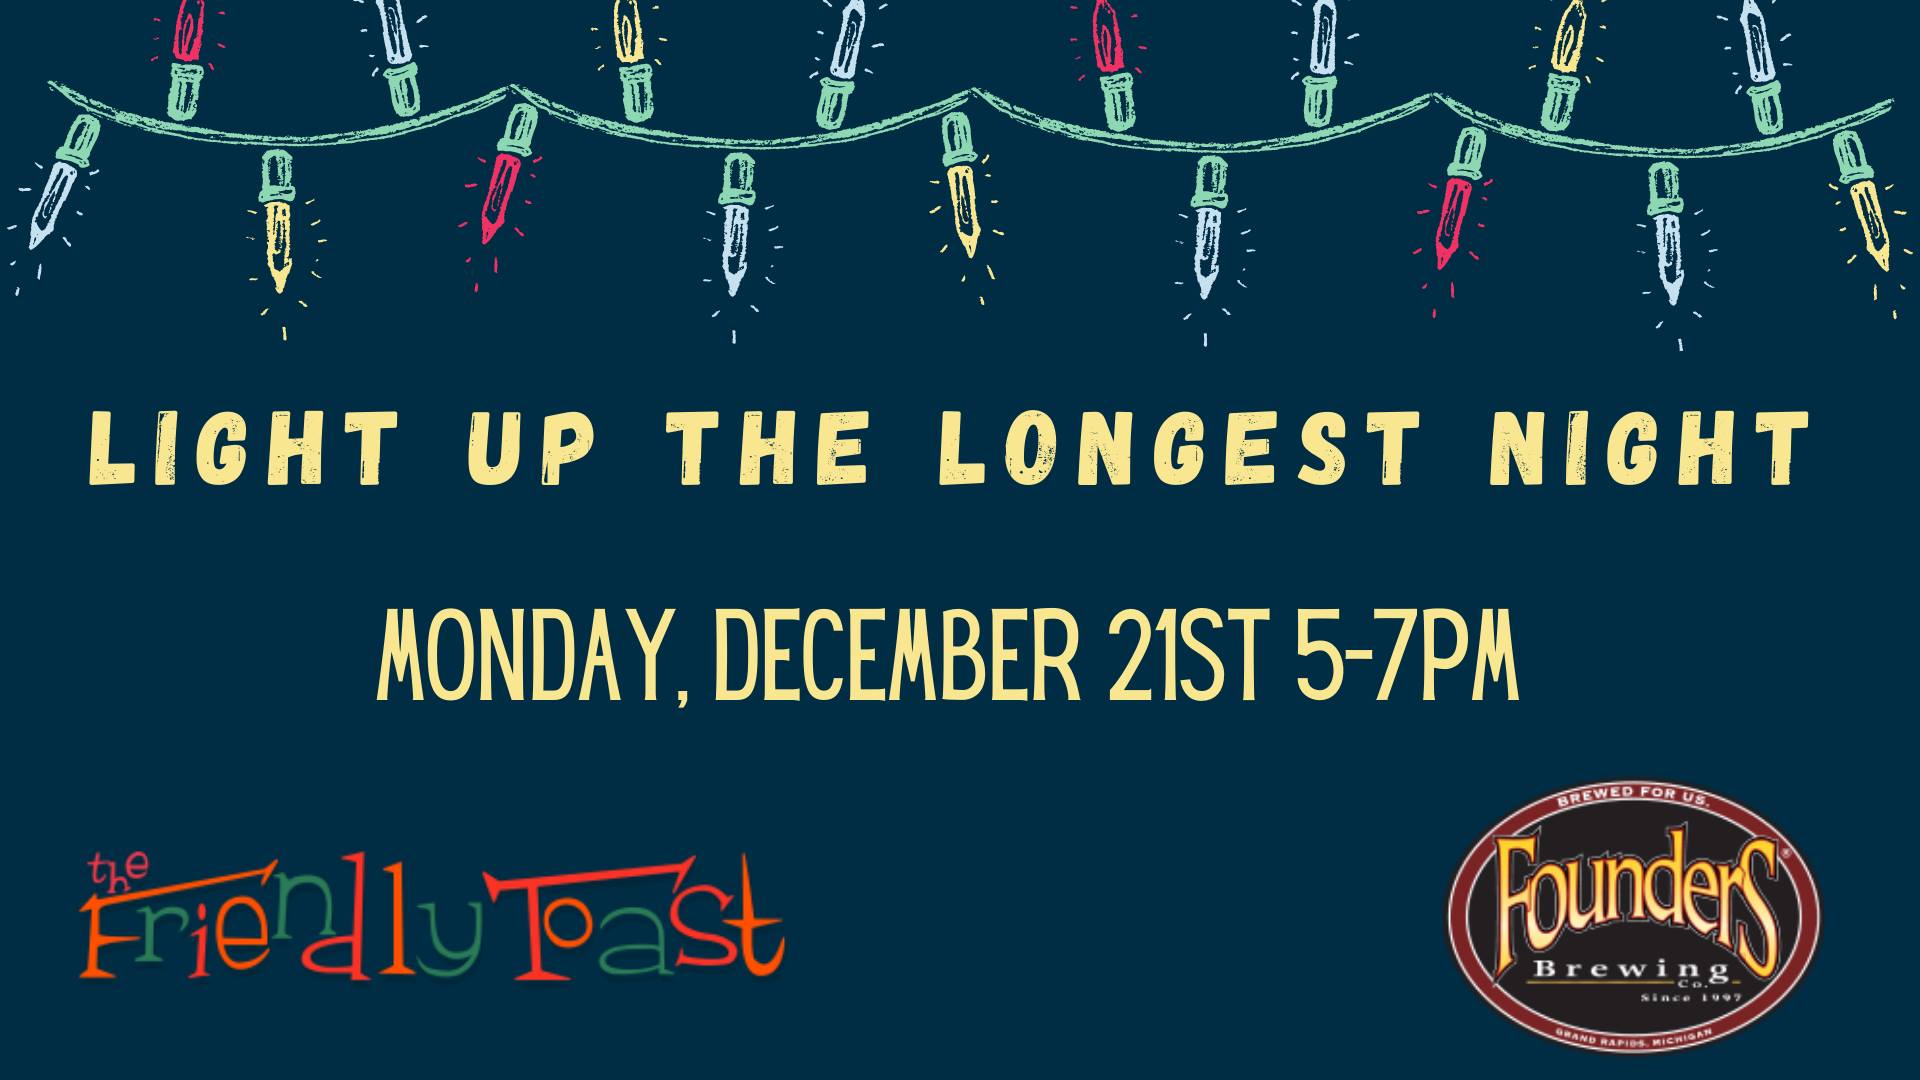 Get Your Tickets For the ‘Light Up The Longest Night’ Charity Event